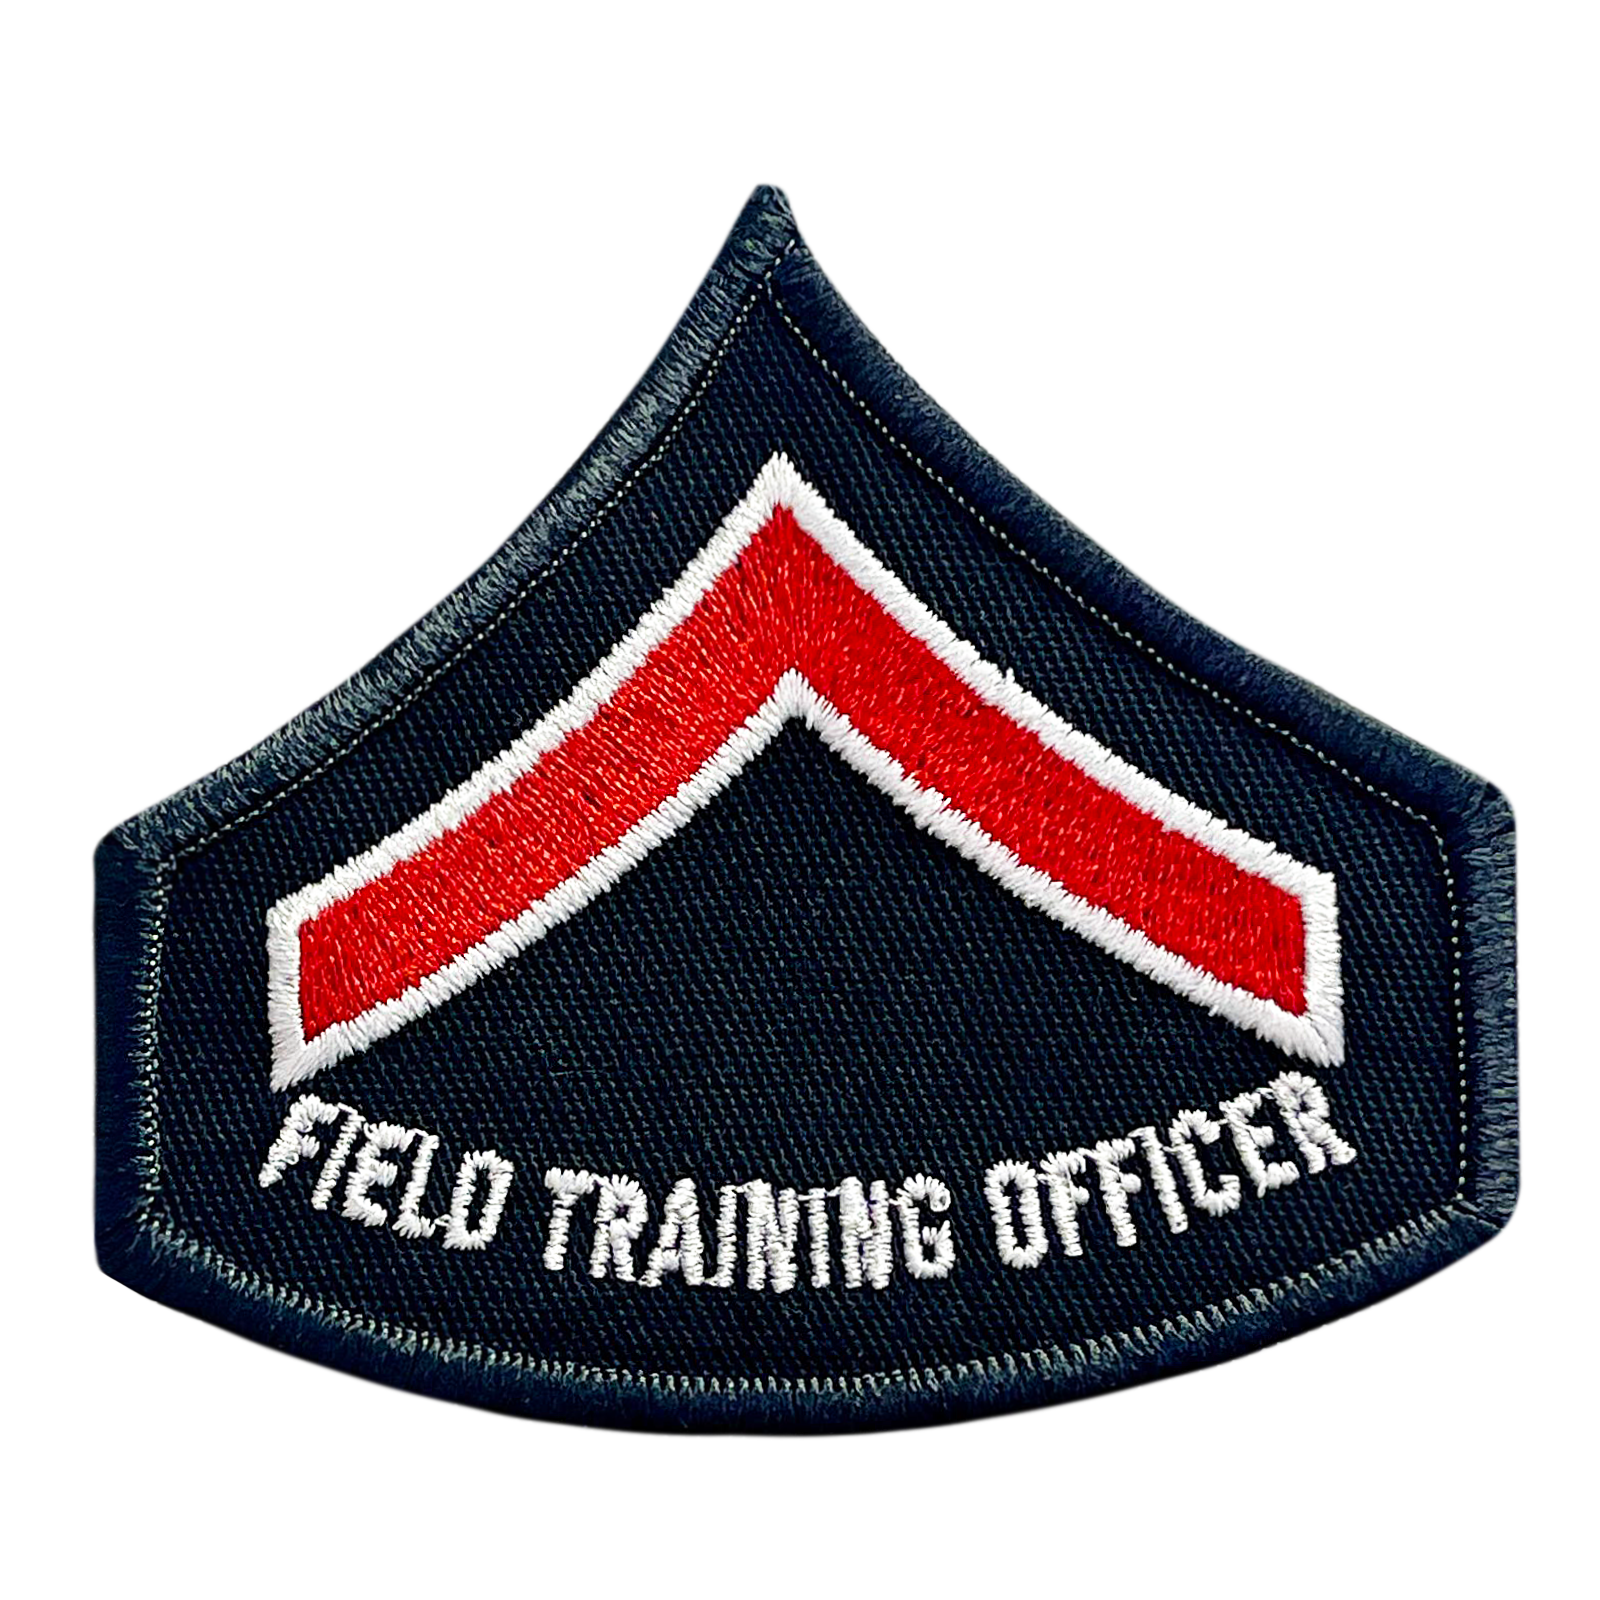 A patch that says field training officer on it